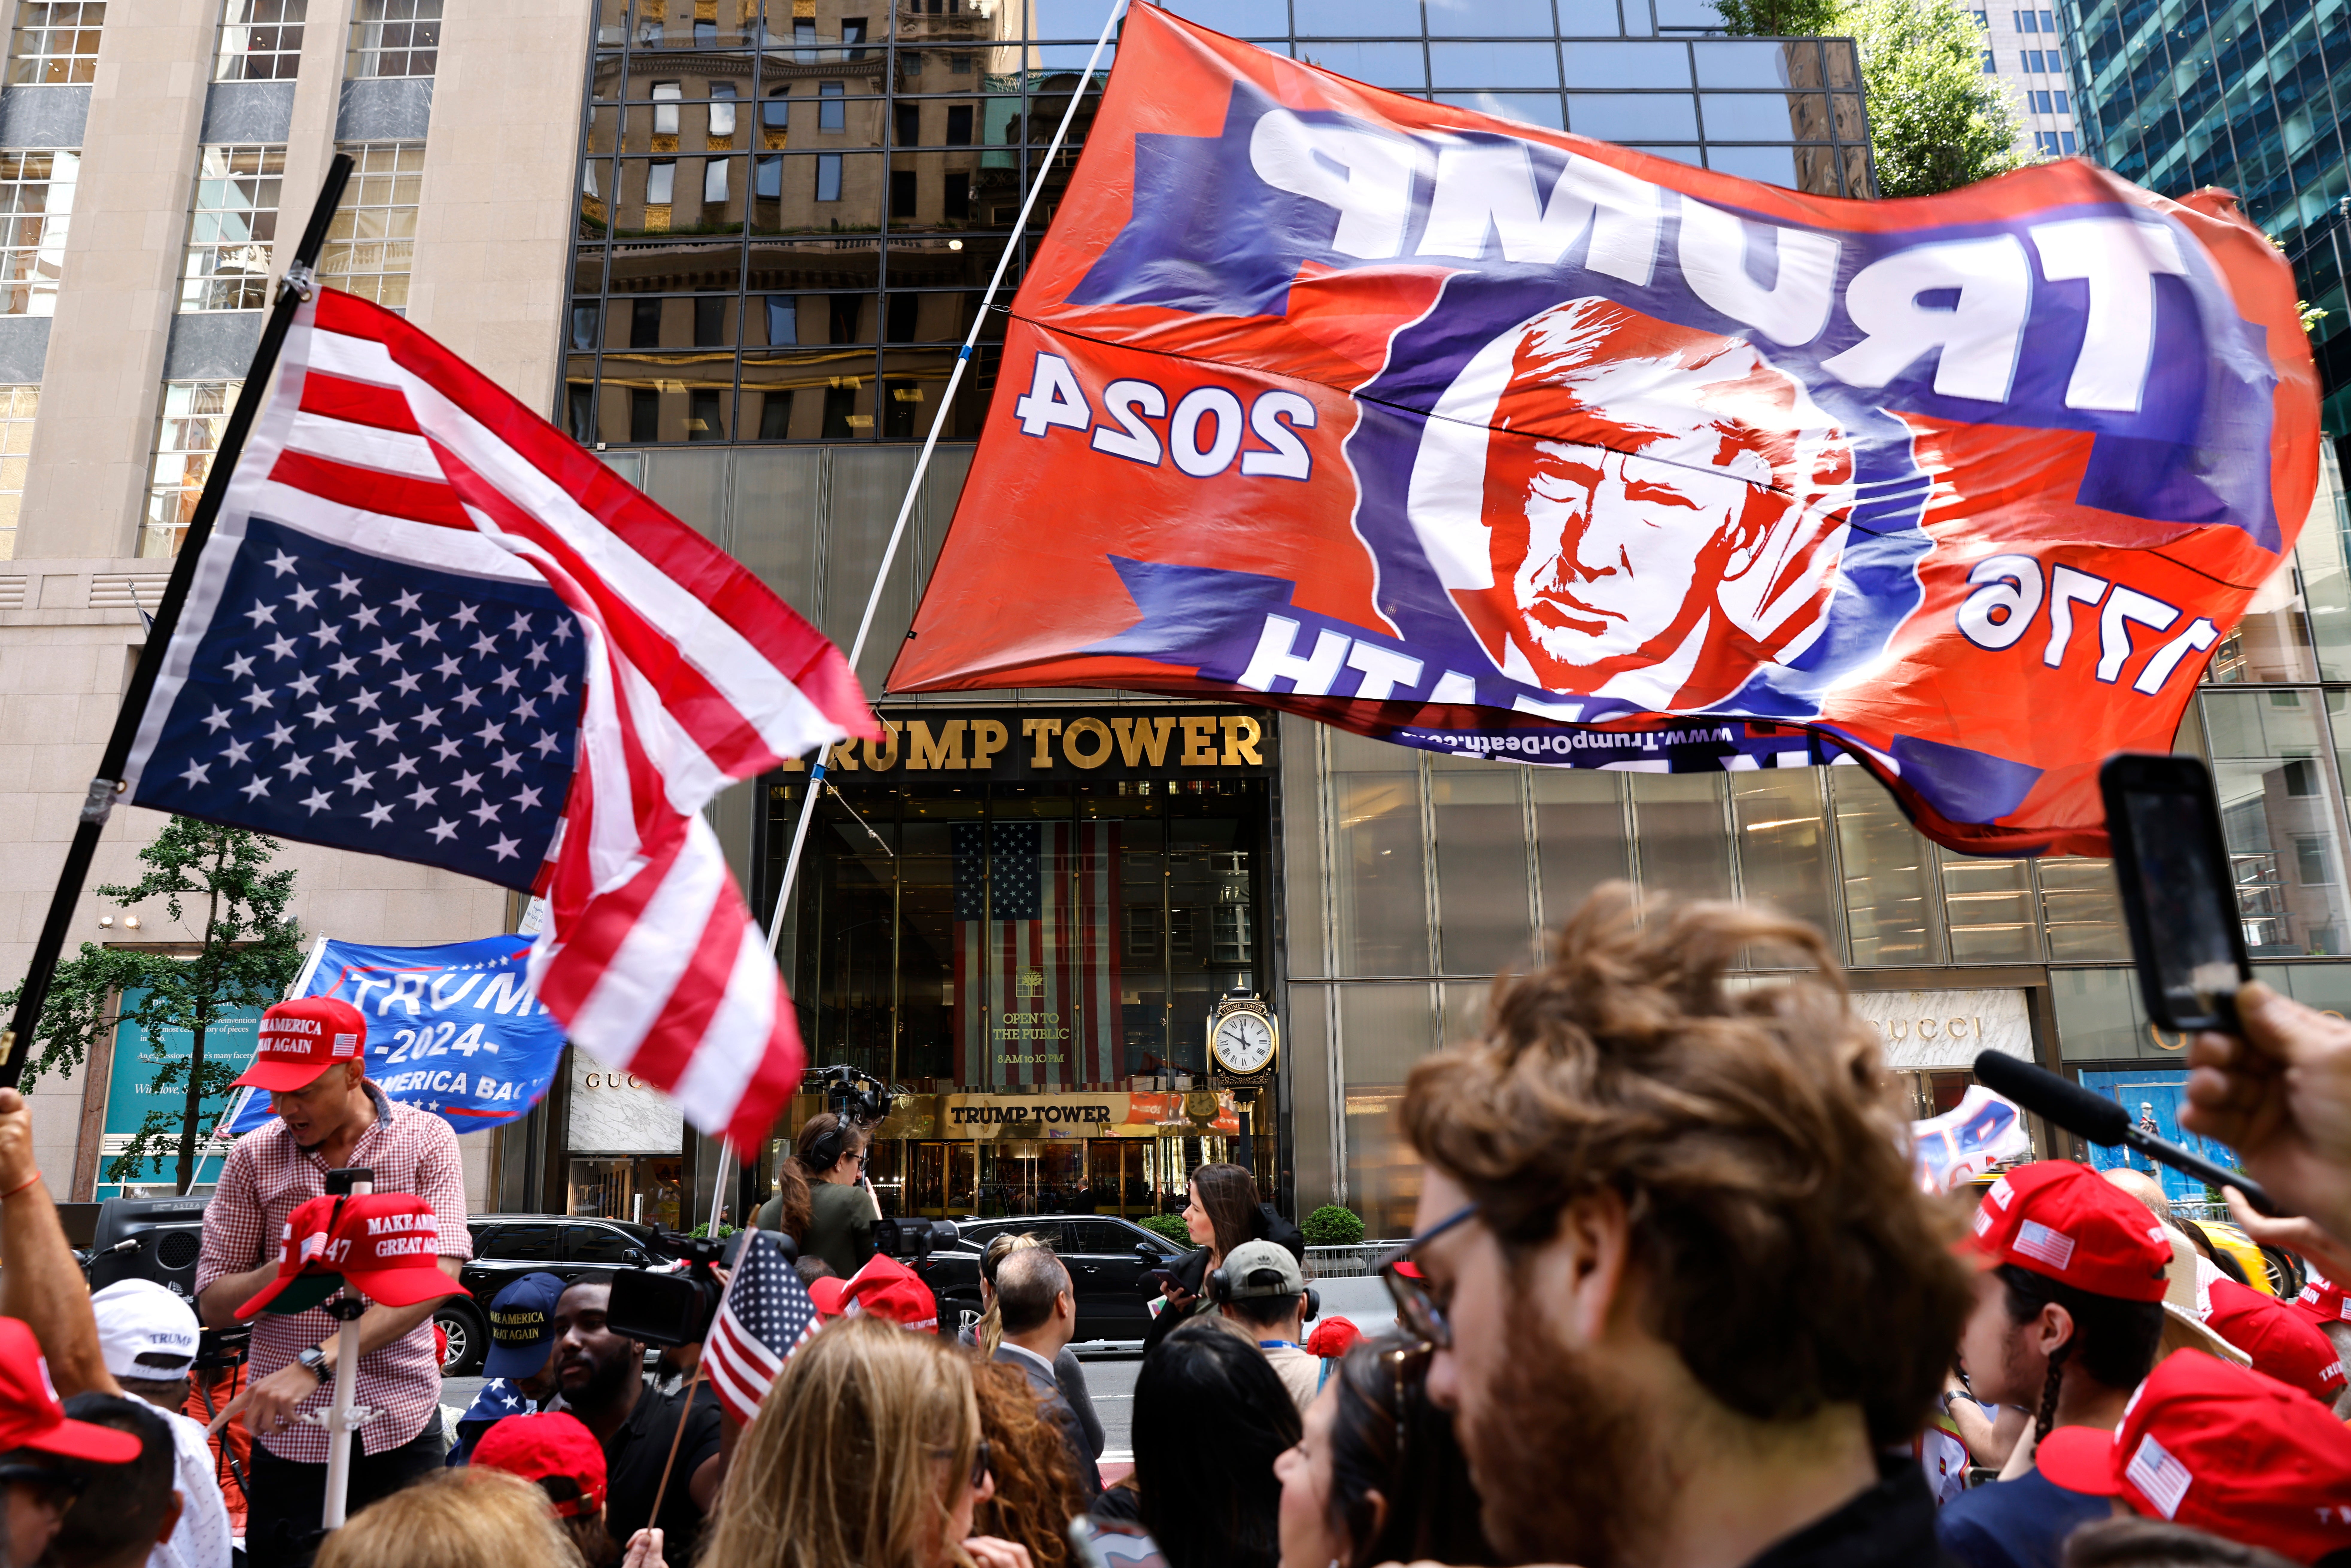 Supporters of former president Donald Trump wave banners after Trump spoke at a press conference at Trump Tower the day after a jury found him guilty on all 34 counts in his hush money criminal trial. A new poll shows nearly half of independent voters think Trump should now end his presidential campaign